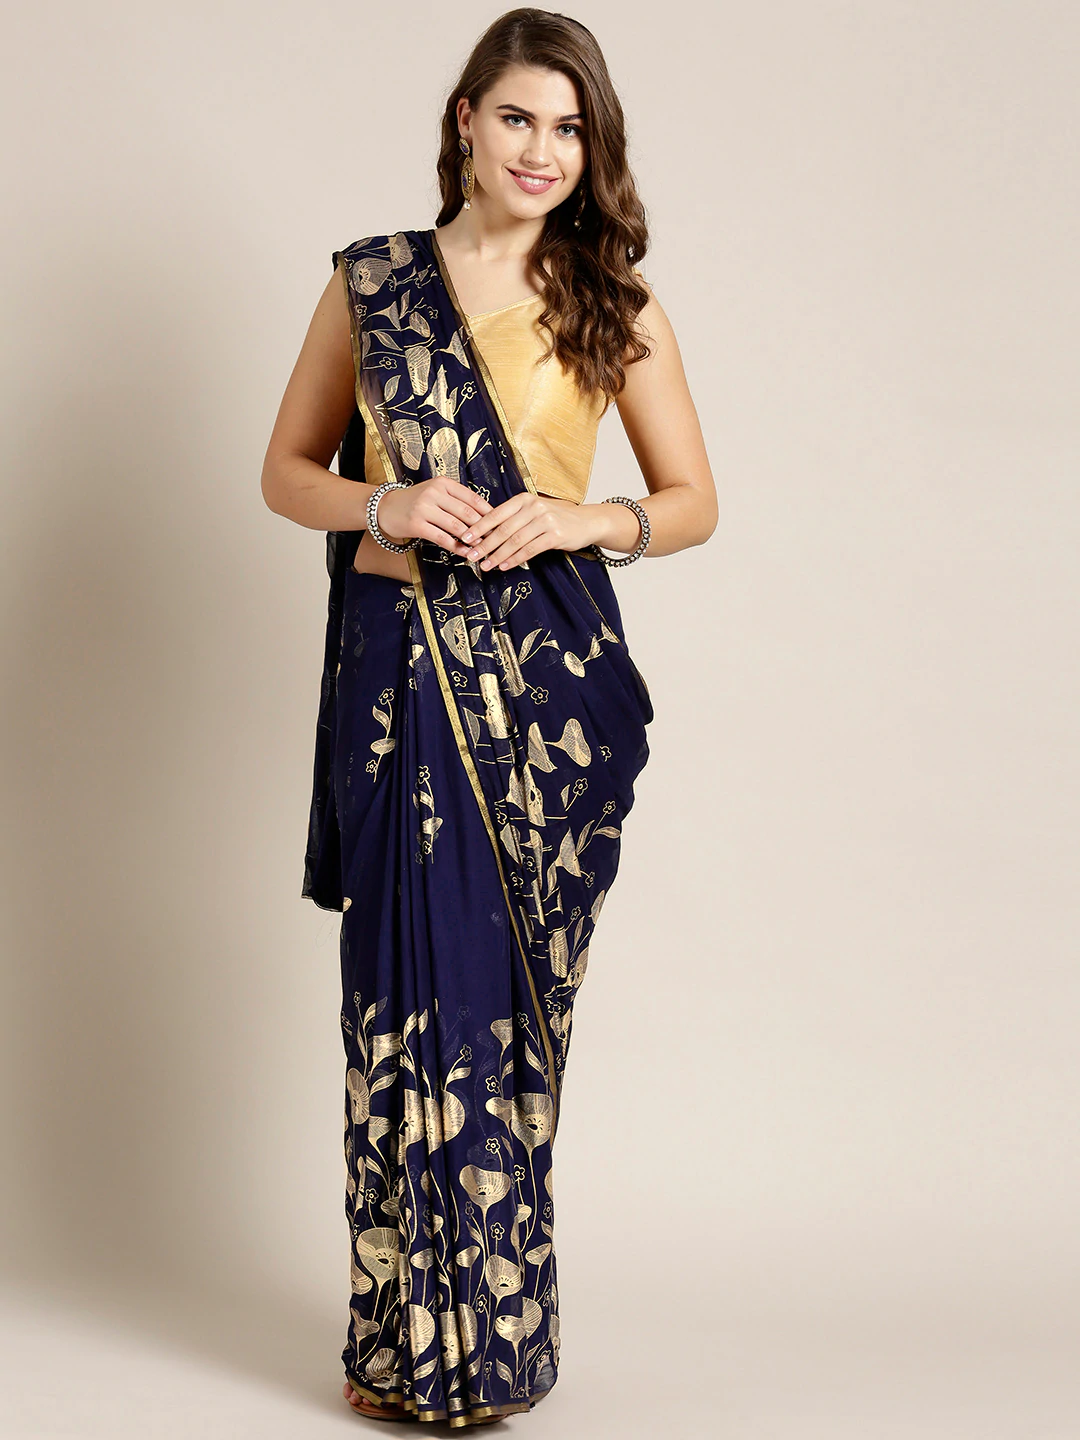 Chiffon Hand-Dyed Saree with Gold Foil Printed Floral Tulip Pattern